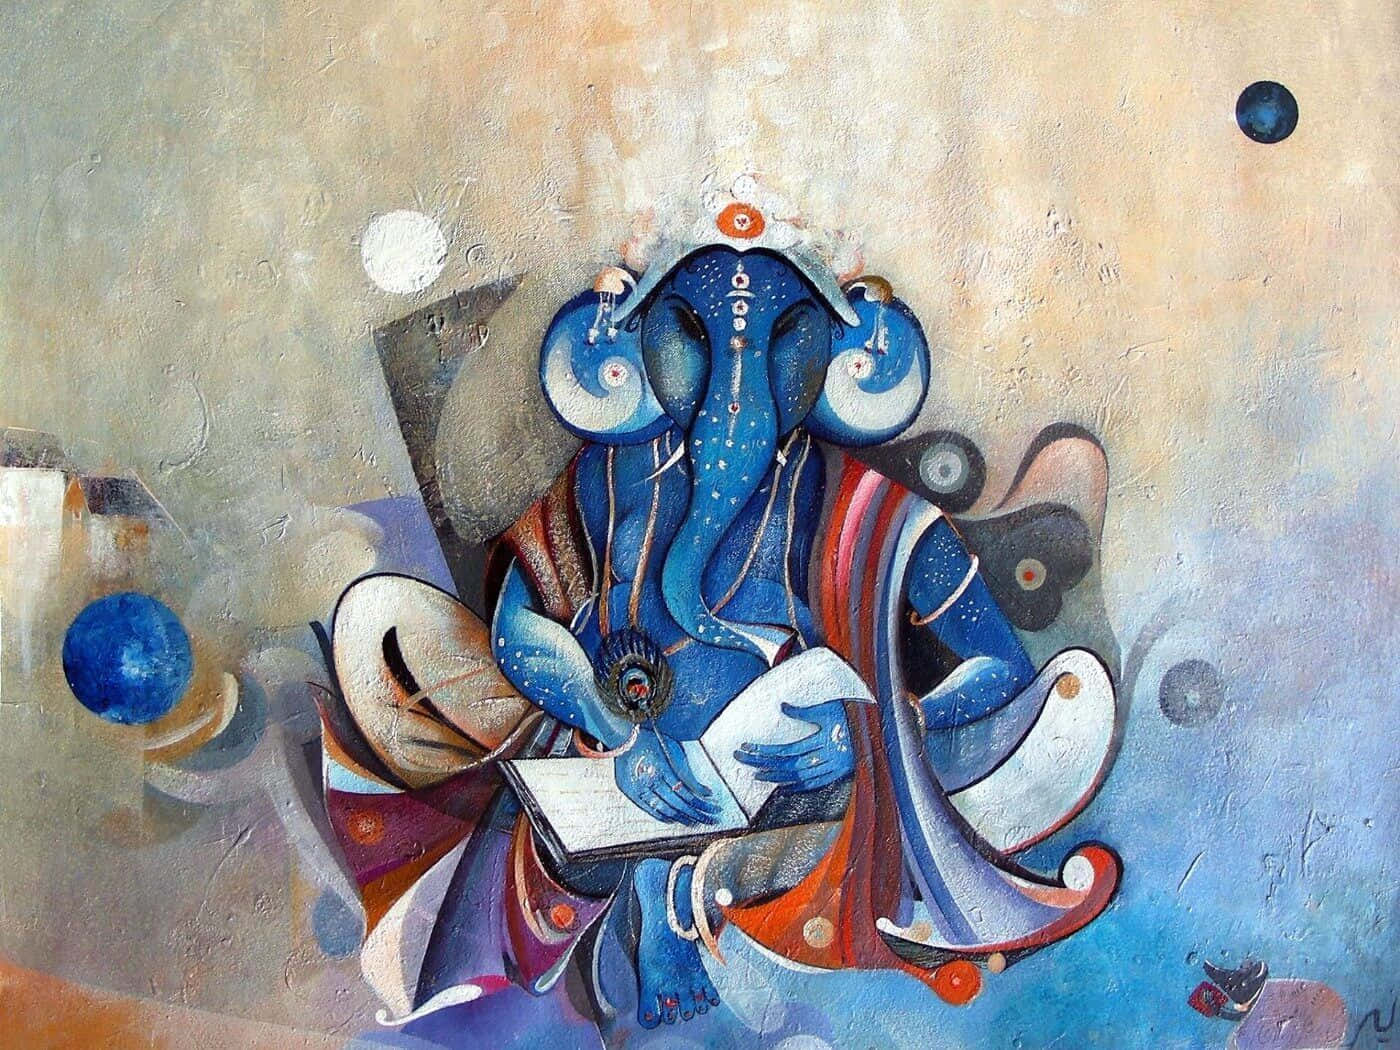 Celebrate the power and presence of Lord Ganesh